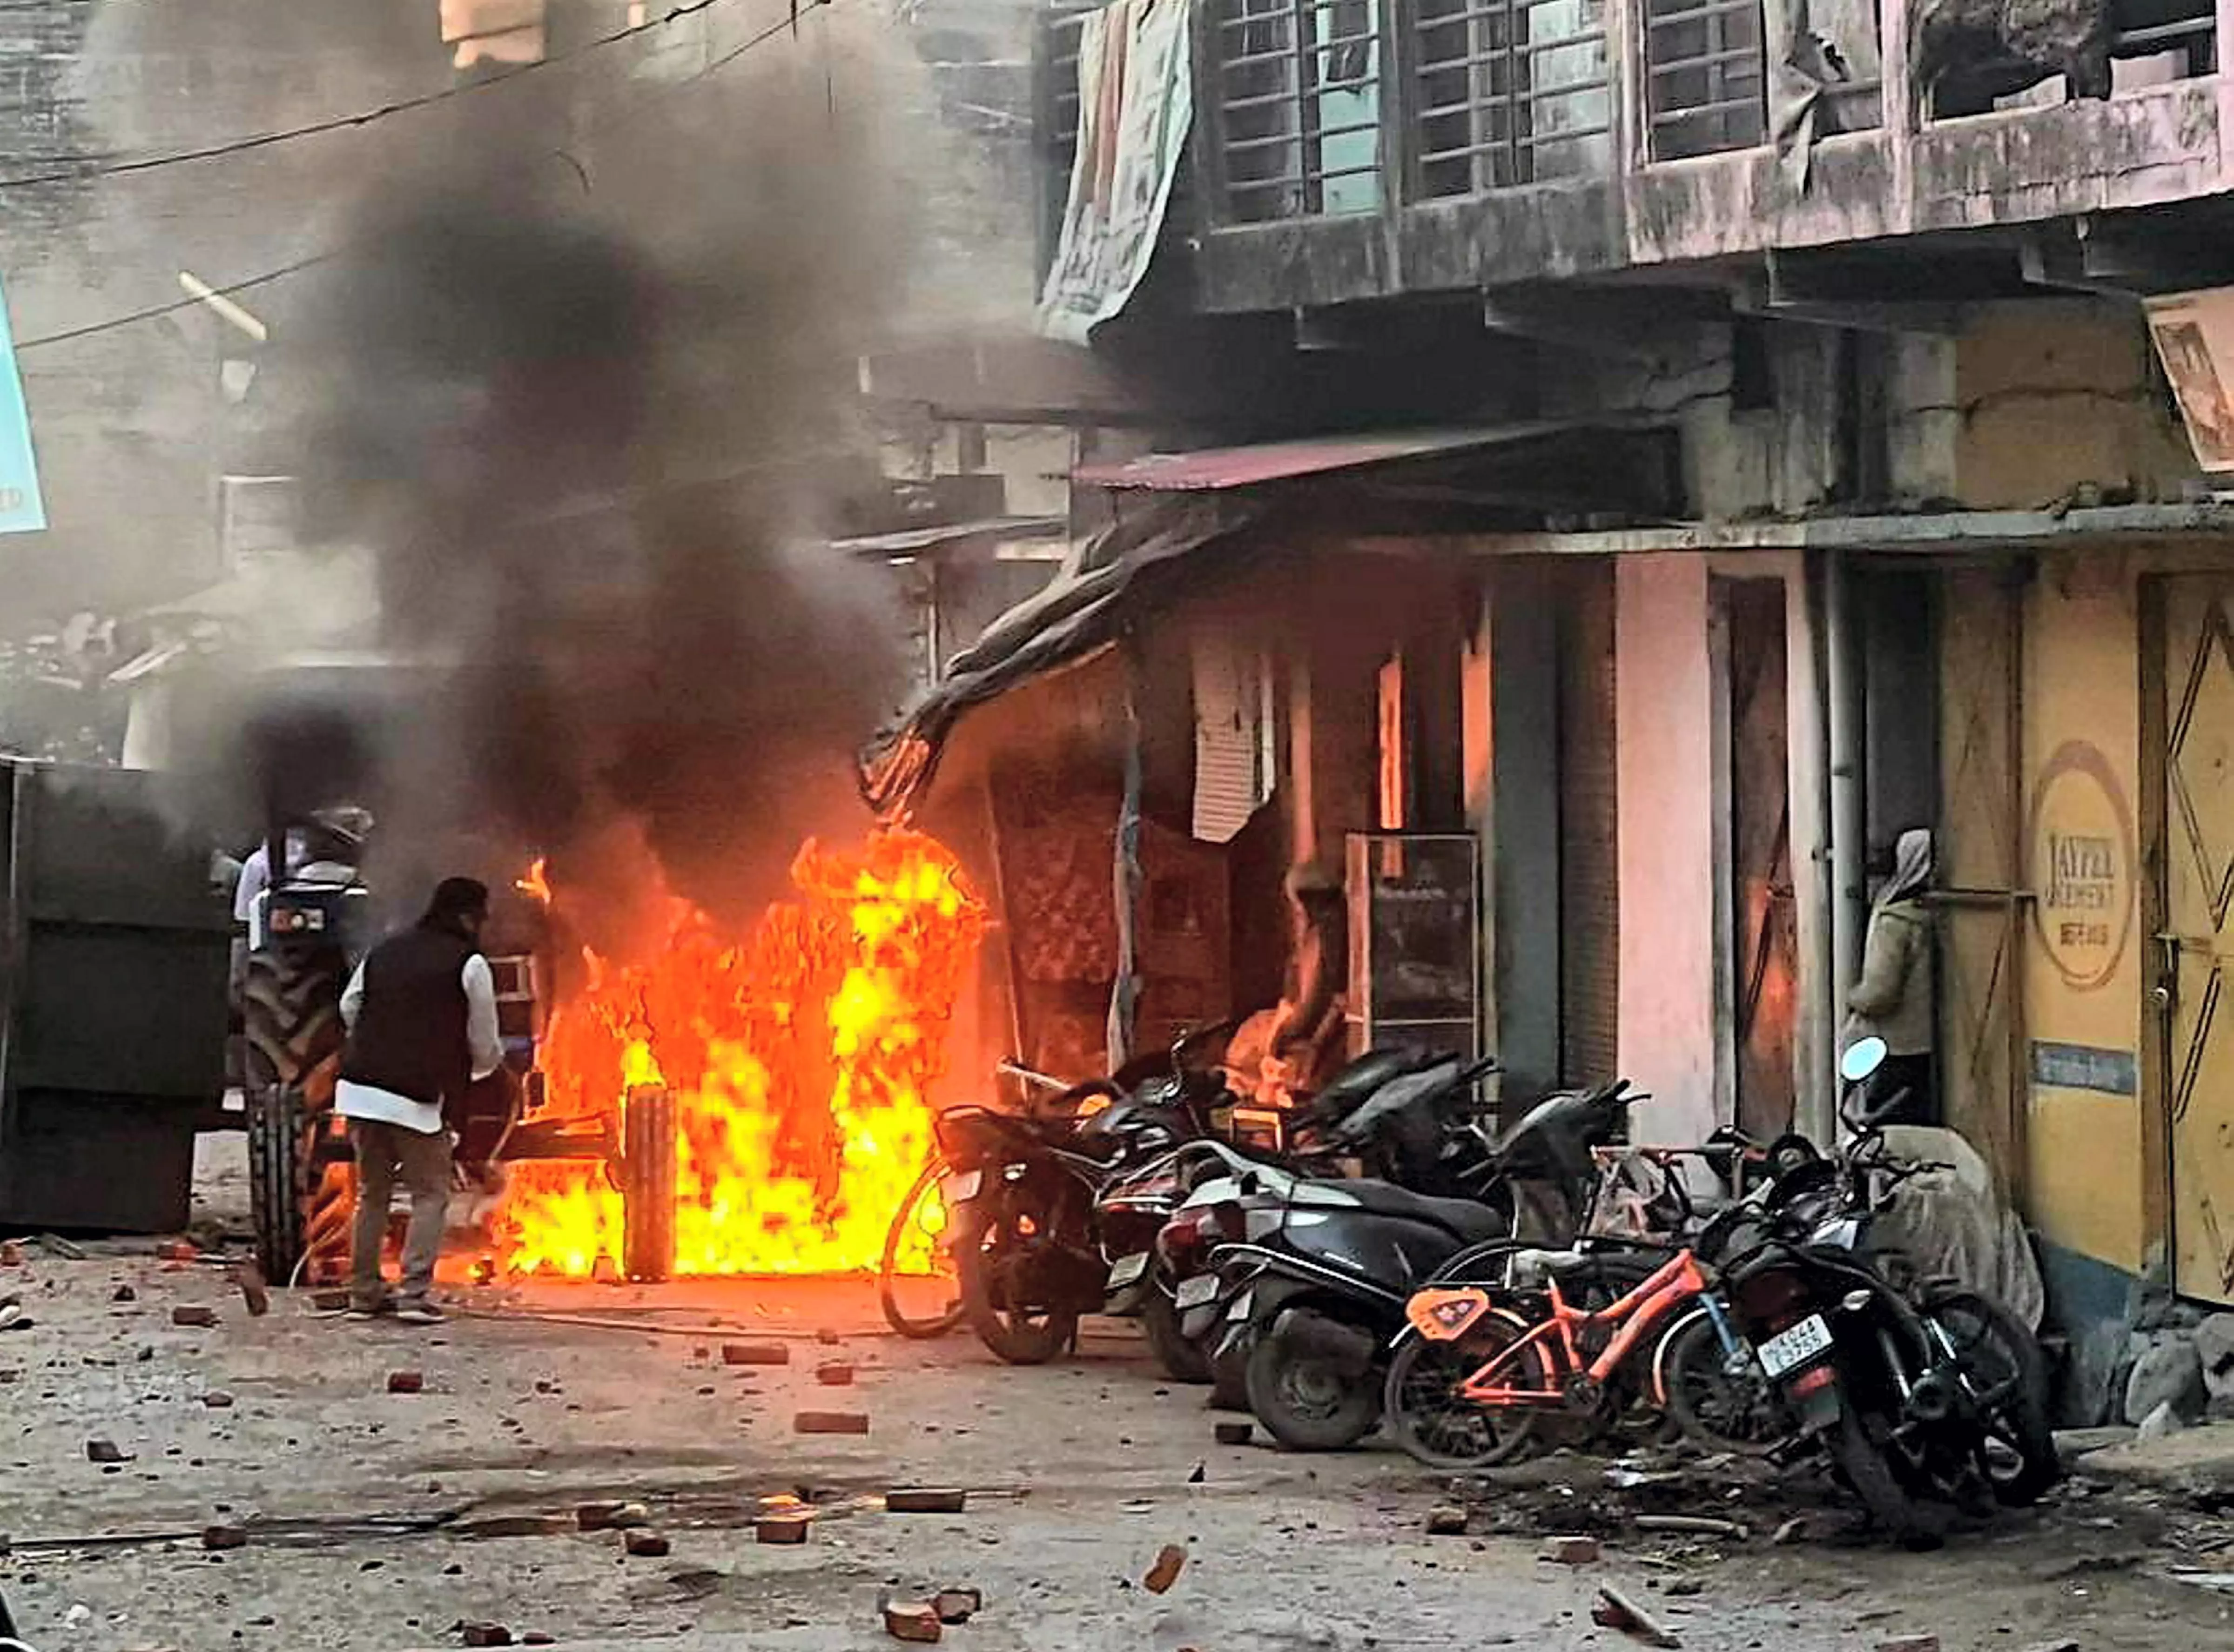 Haldwani violence: 4 dead, 250 injured; shoot-at-sight orders issued for rioters